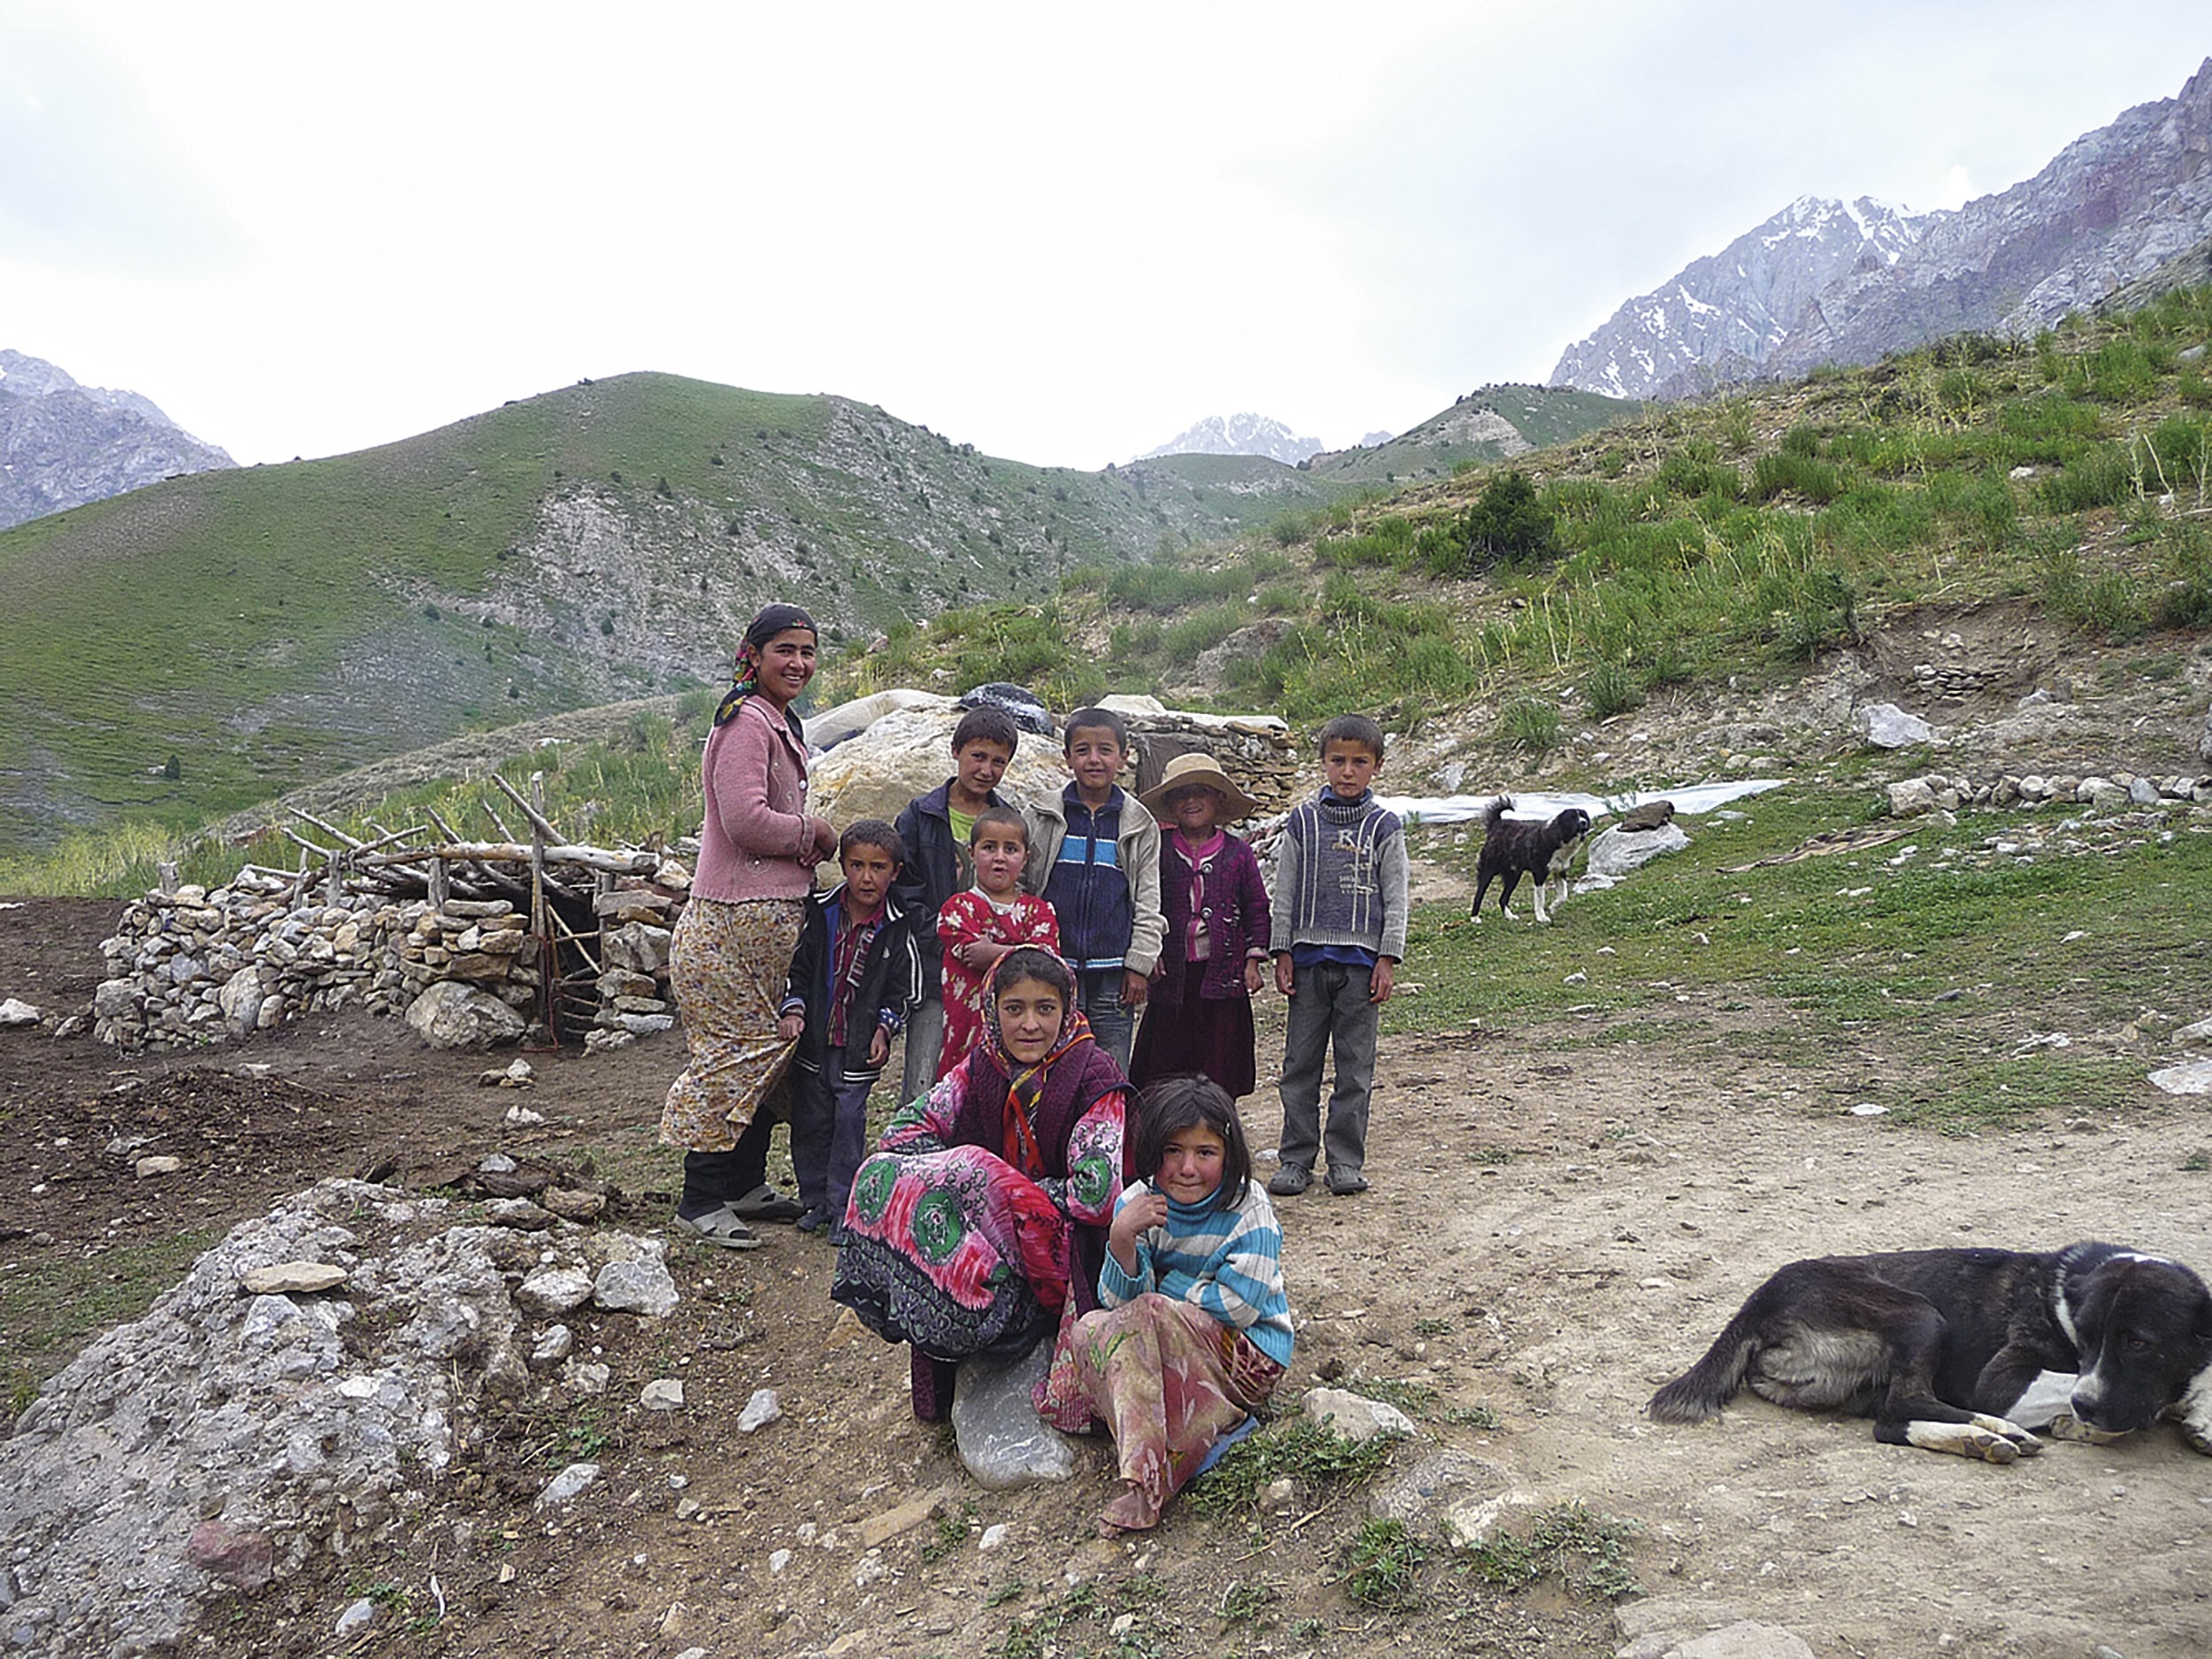 A shepherd family at the foot of the Tavasang Pass